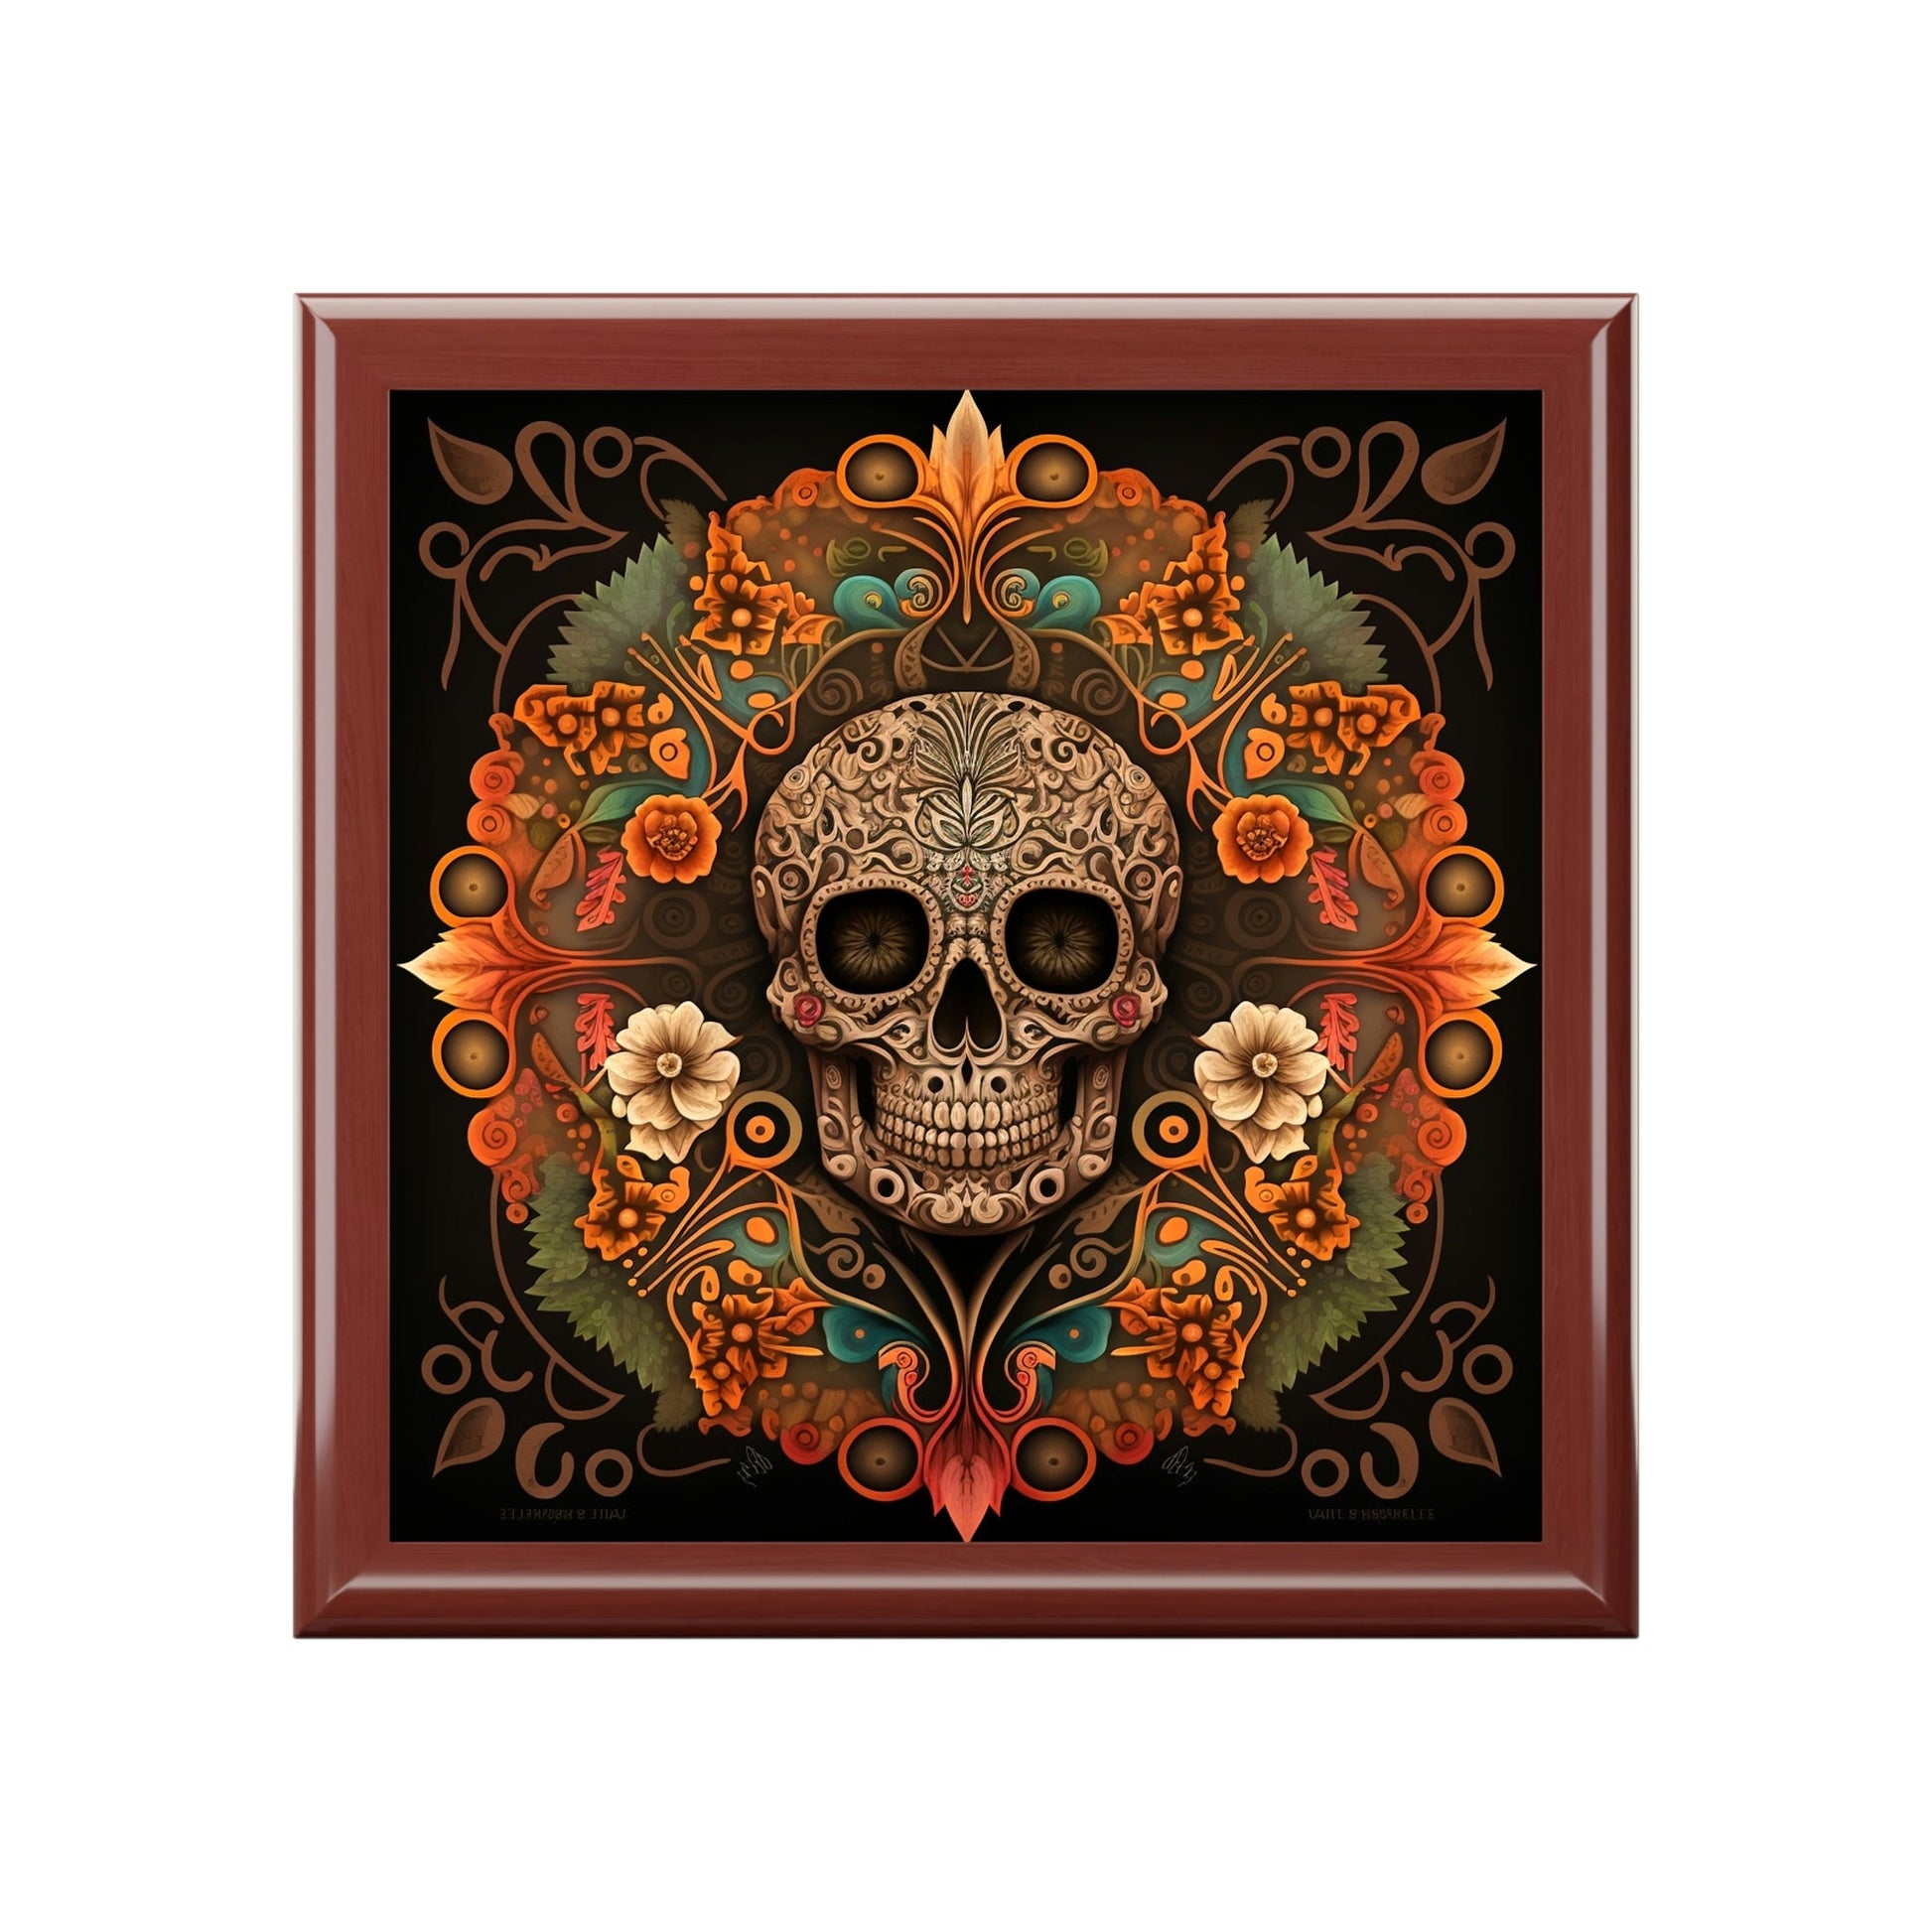 Day of the Dead Skull Mandala Wooden Keepsake Jewelry Box with Ceramic Tile Cover